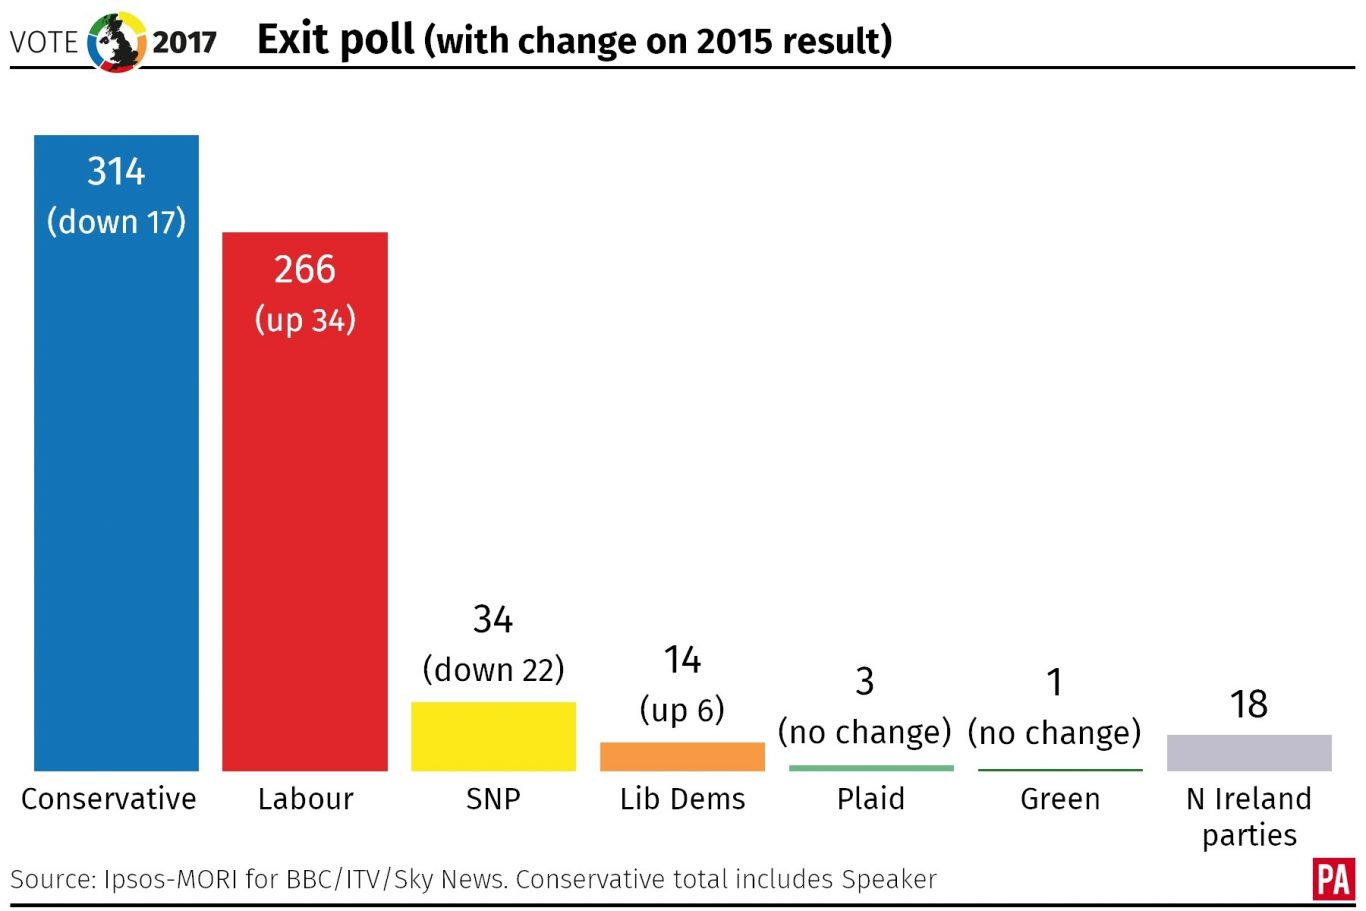 Exit poll for the 2017 general election